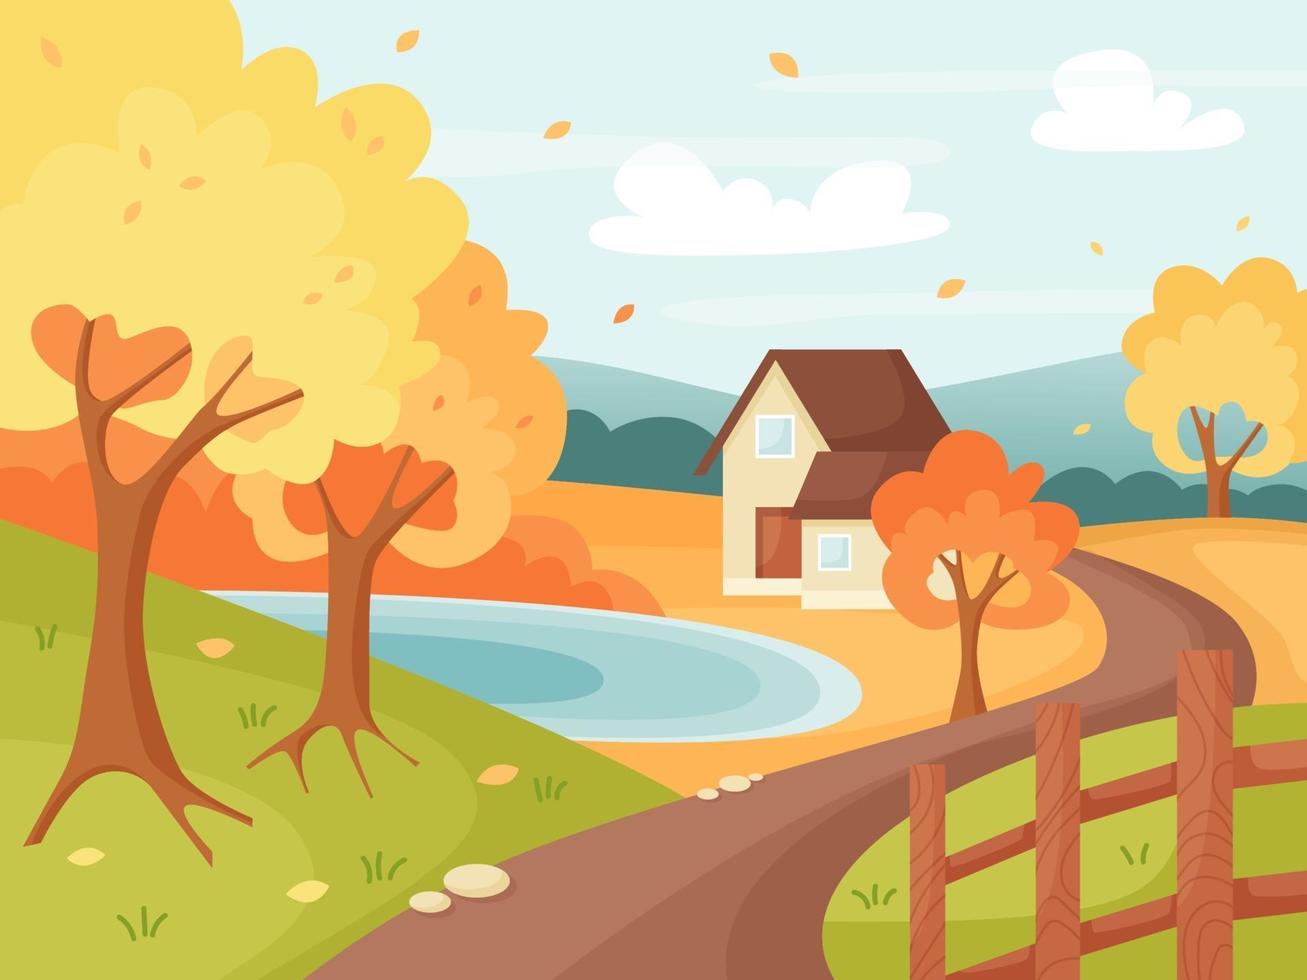 Autumn countryside landscape with houses, trees, lake, and fence vector